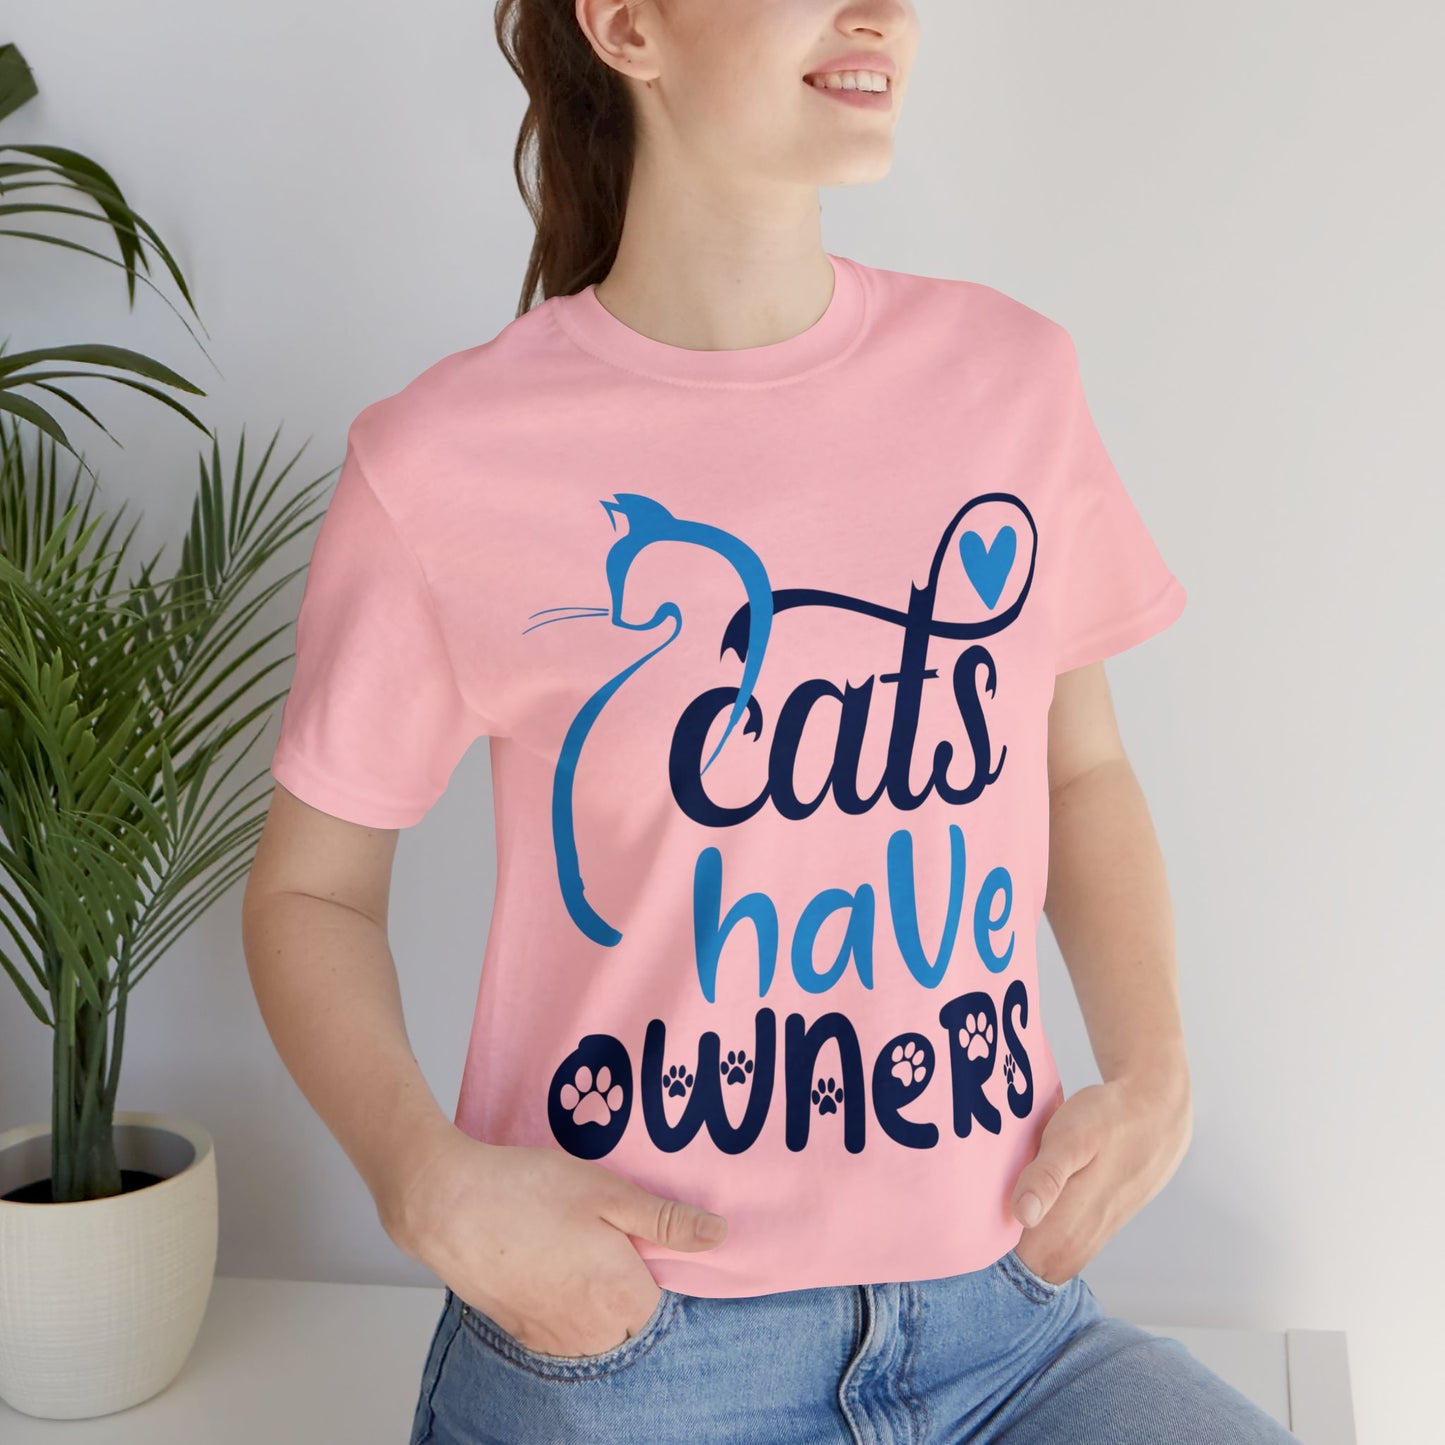 Cats Have Owners' Cat T-Shirts - Show Your Feline Love in Fashion!